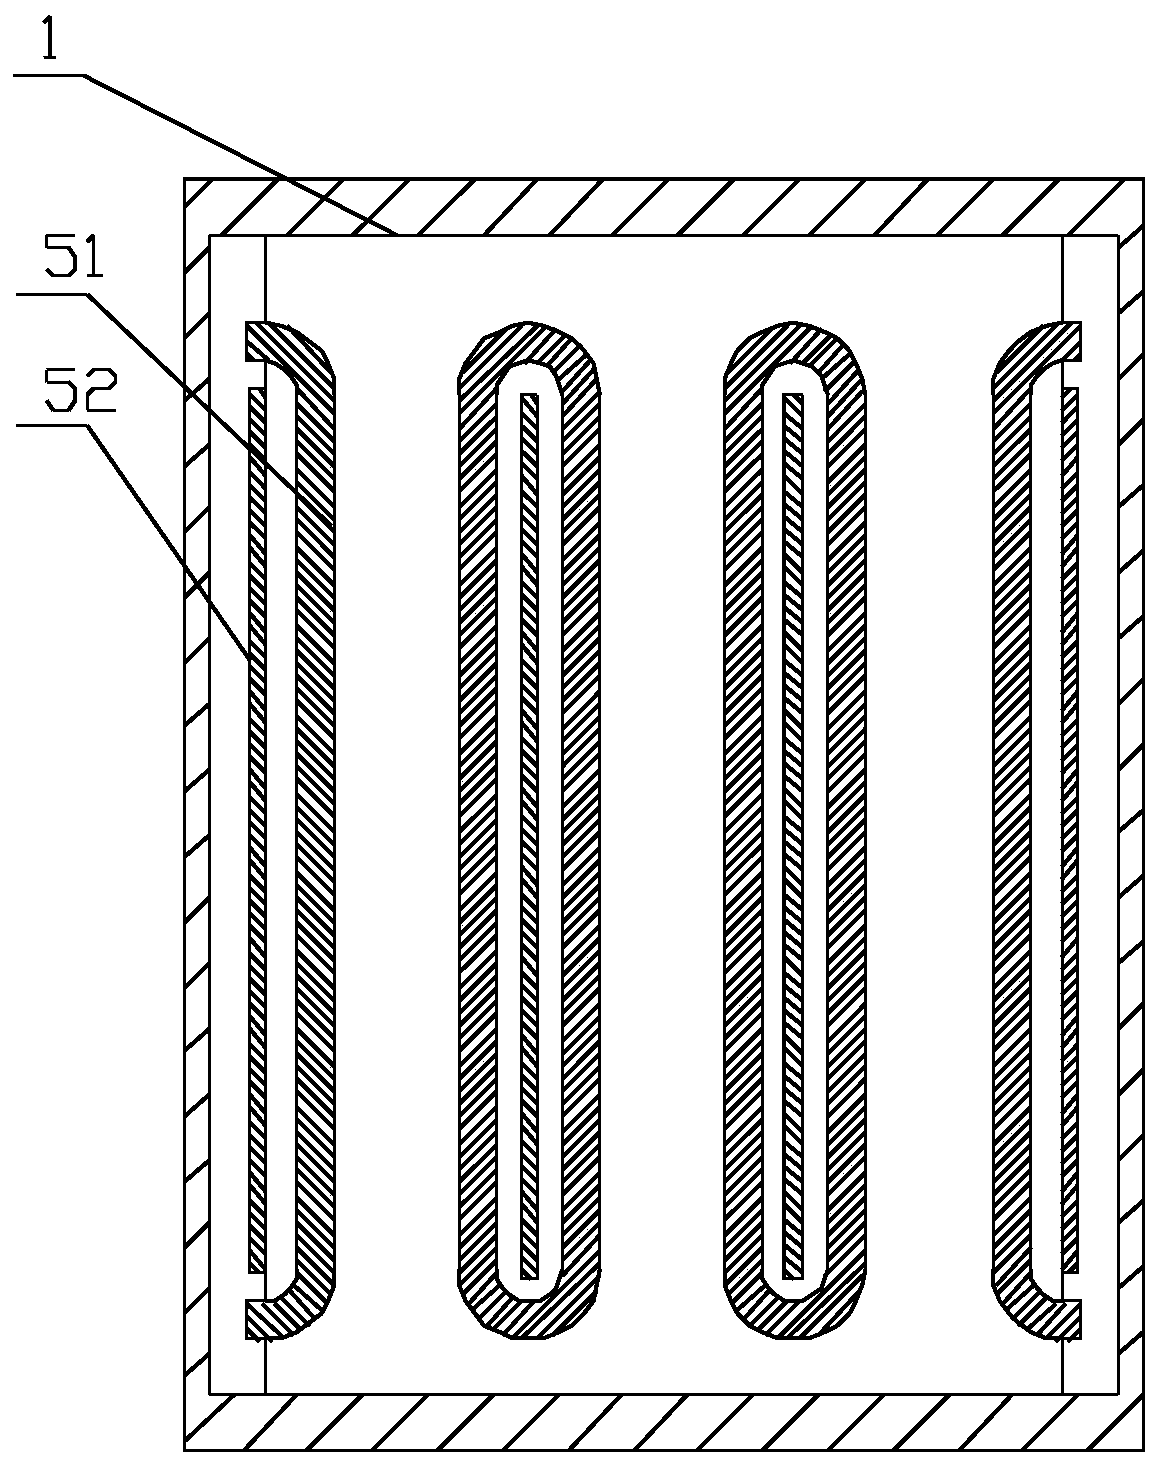 Magnetron sputtering coating system and method for preparing dysprosium / terbium coatings